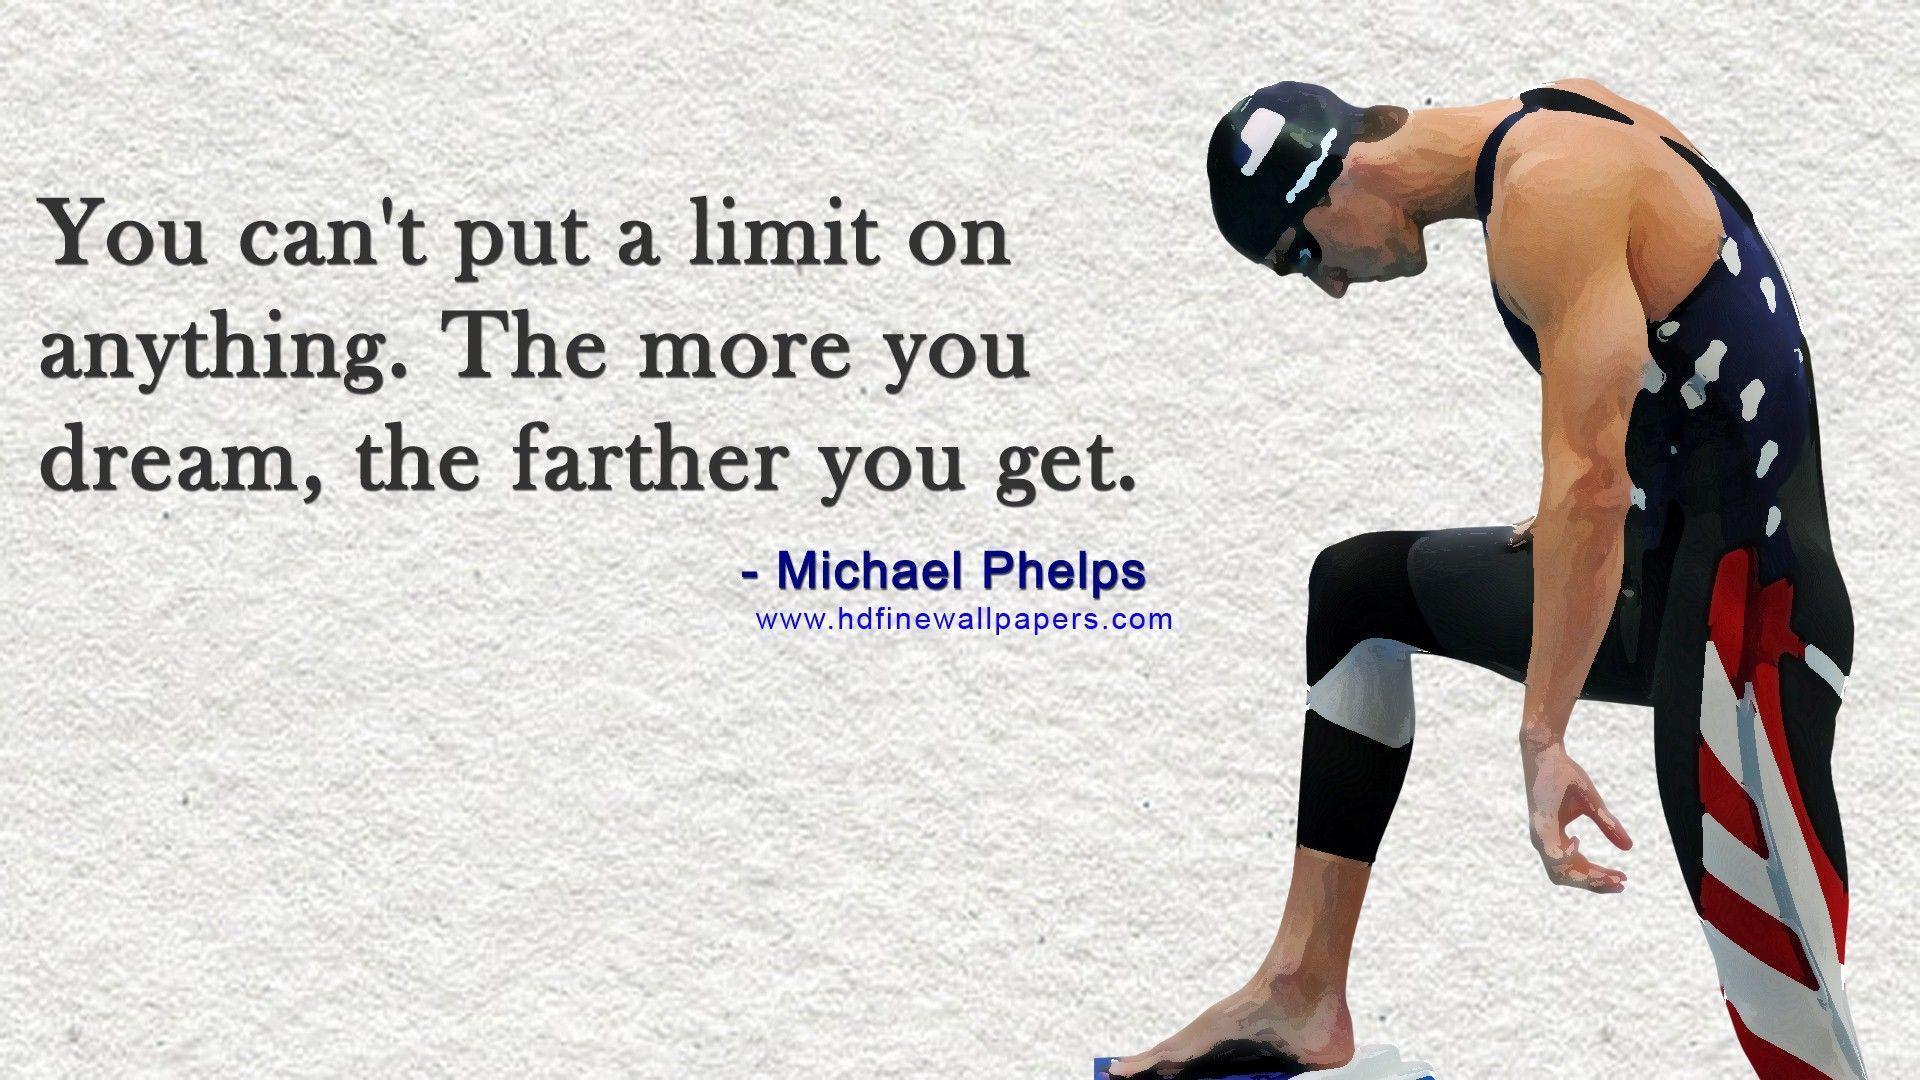 Michael Phelps Quotes Wallpaper HD Background, Image, Pics